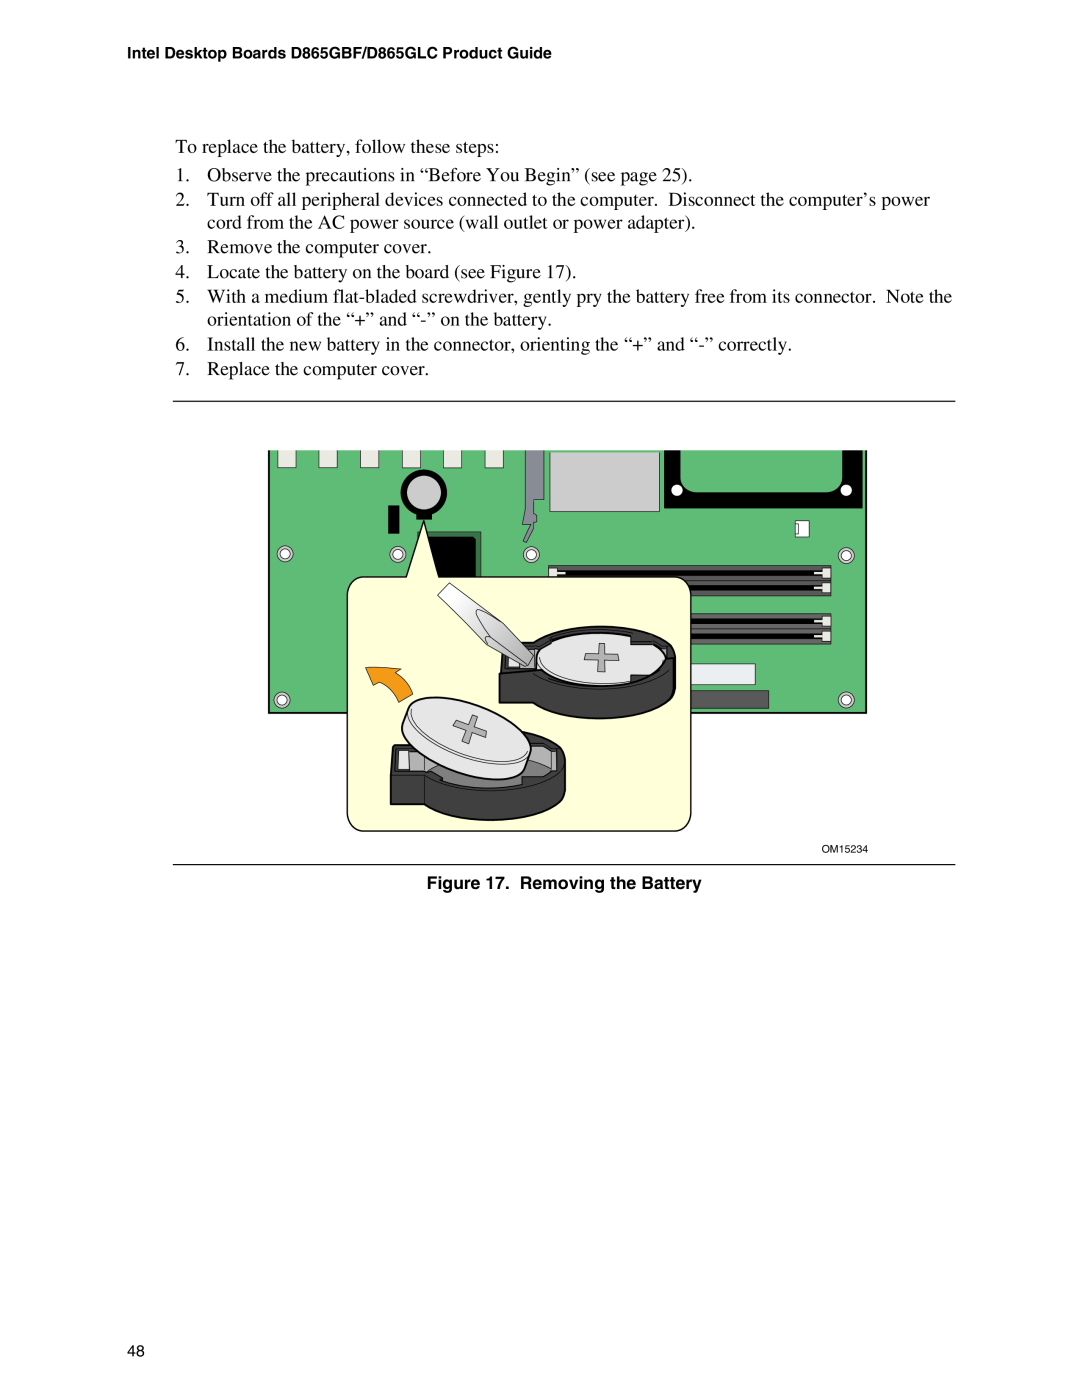 Intel D865GLC, D865GBF manual To replace the battery, follow these steps 